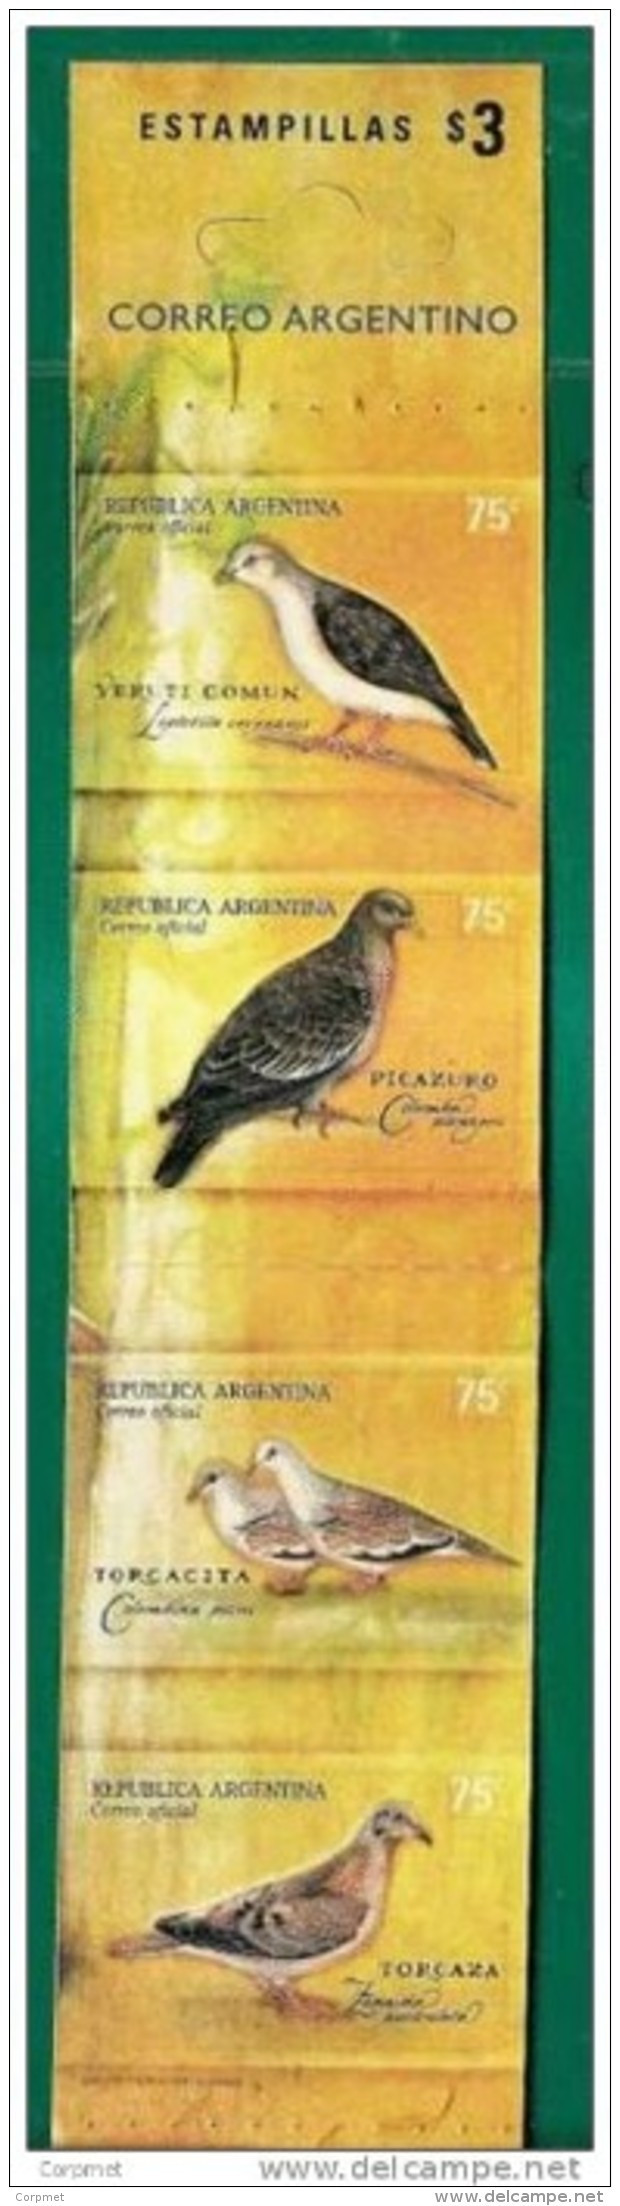 DOVE - COLOMBE - PALOMAS - VF ARGENTINA Autoadhesive 2000 CARNET - BOOKLET - 4 STAMPS - # 3031 - Cuadernillos